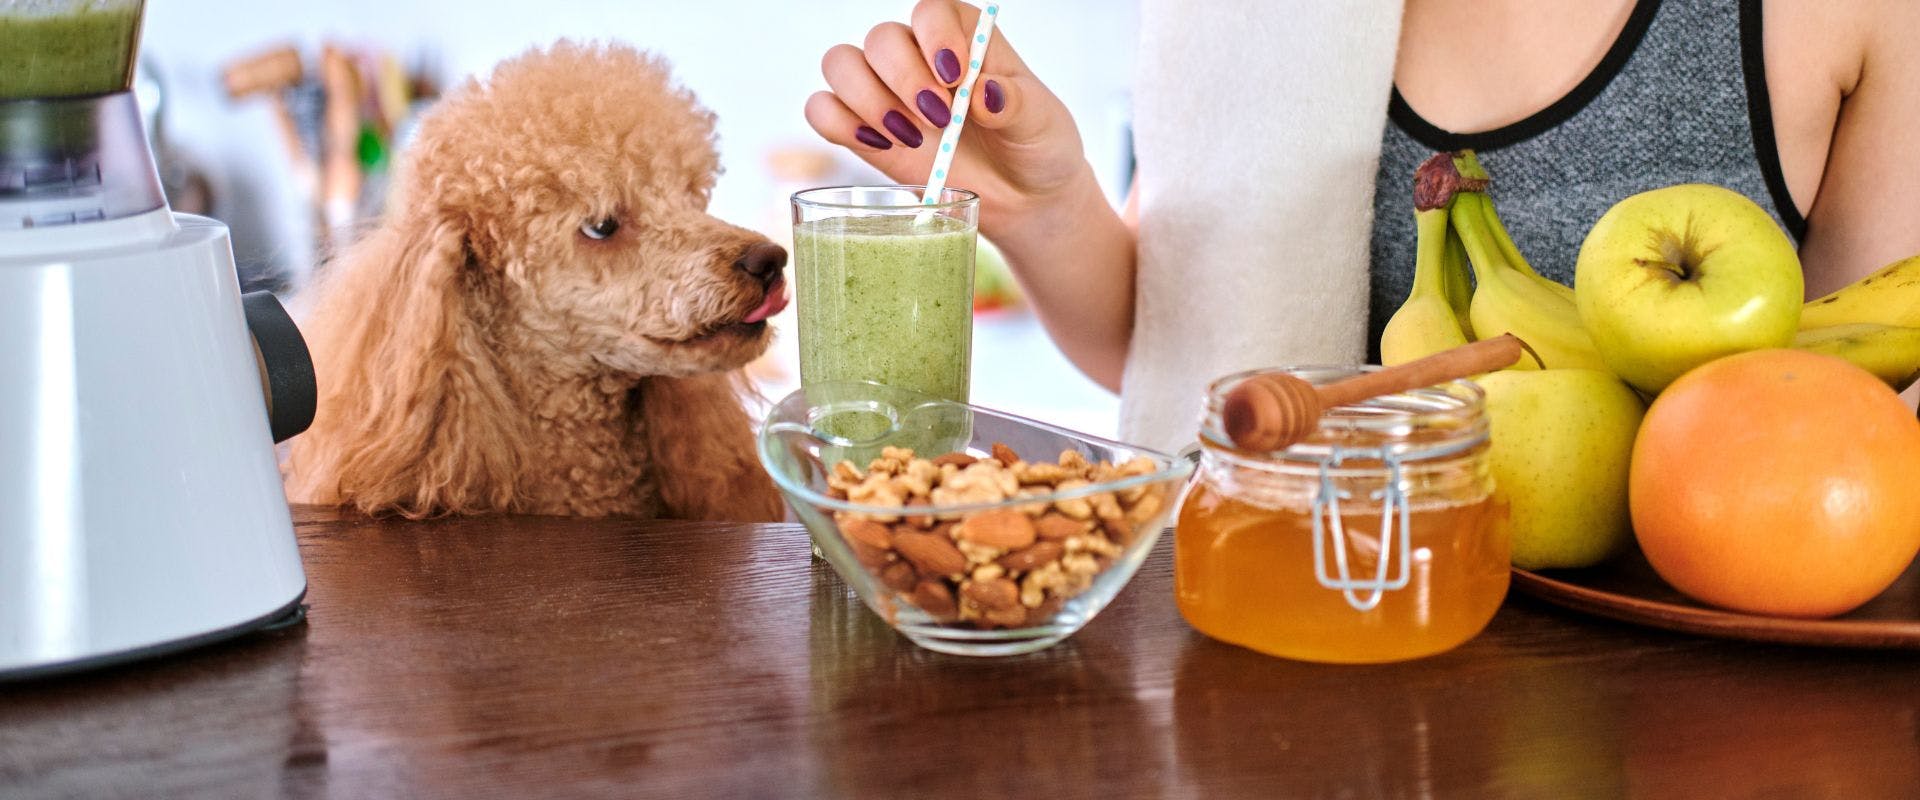 Poodle sat with woman drinking a smoothie